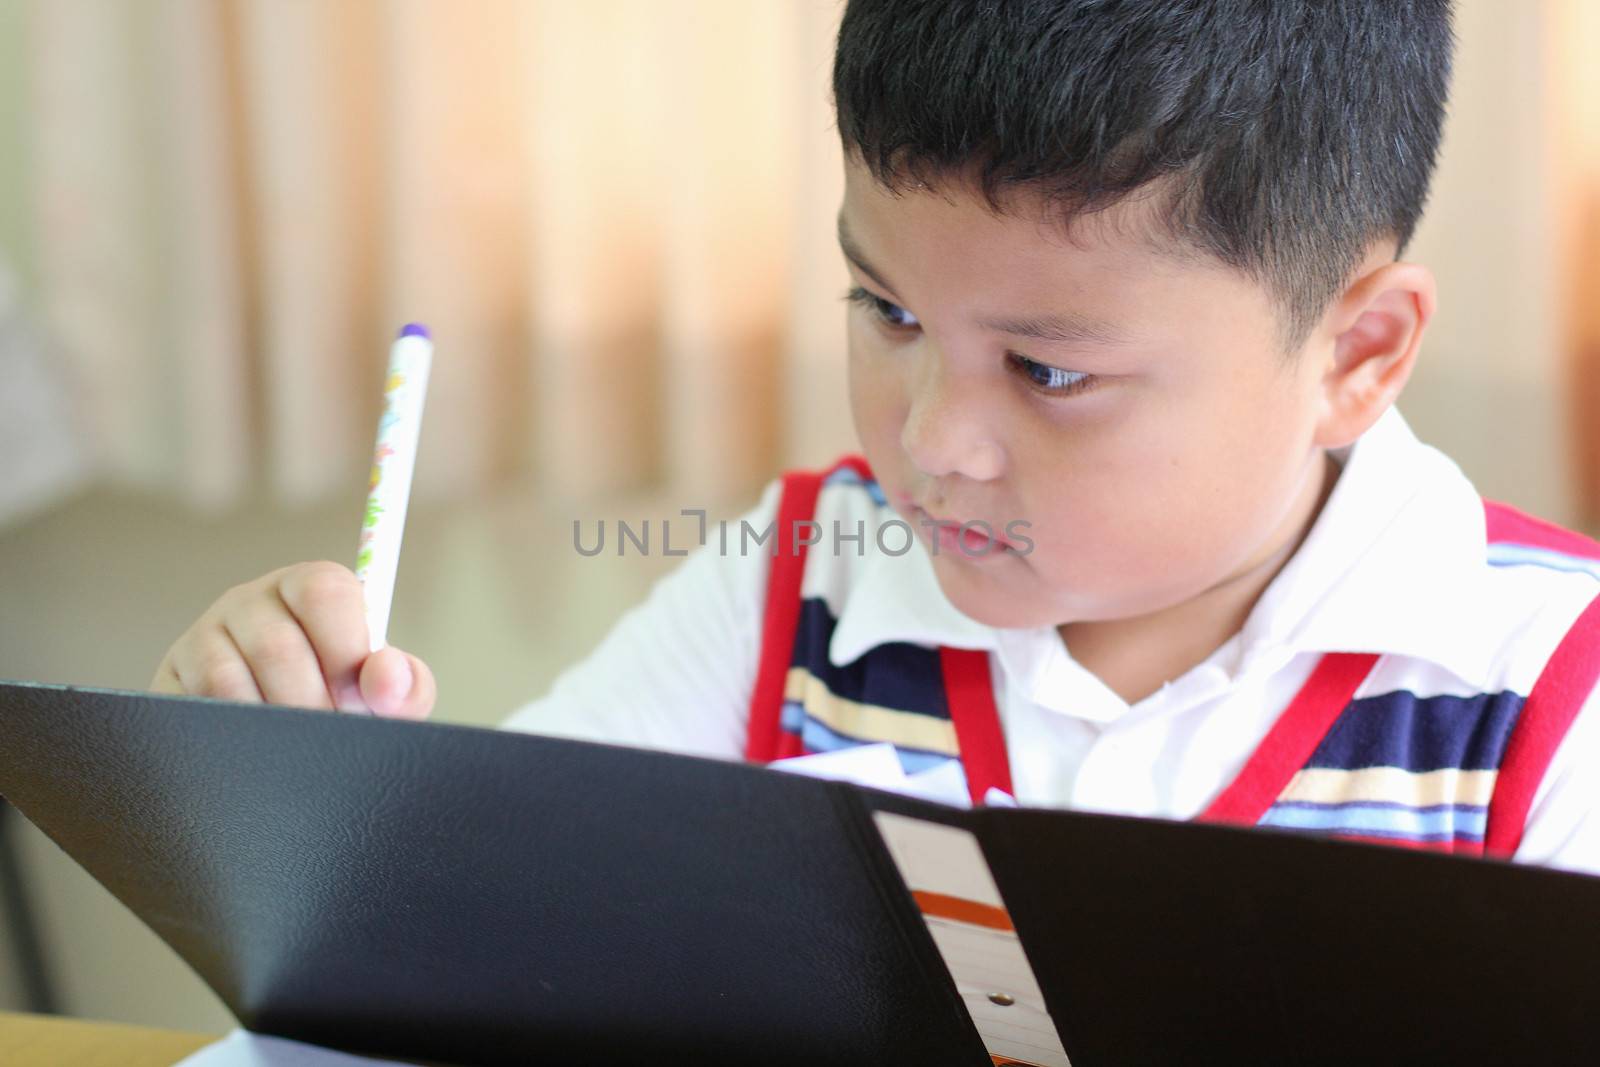 The boy intently to checking documents